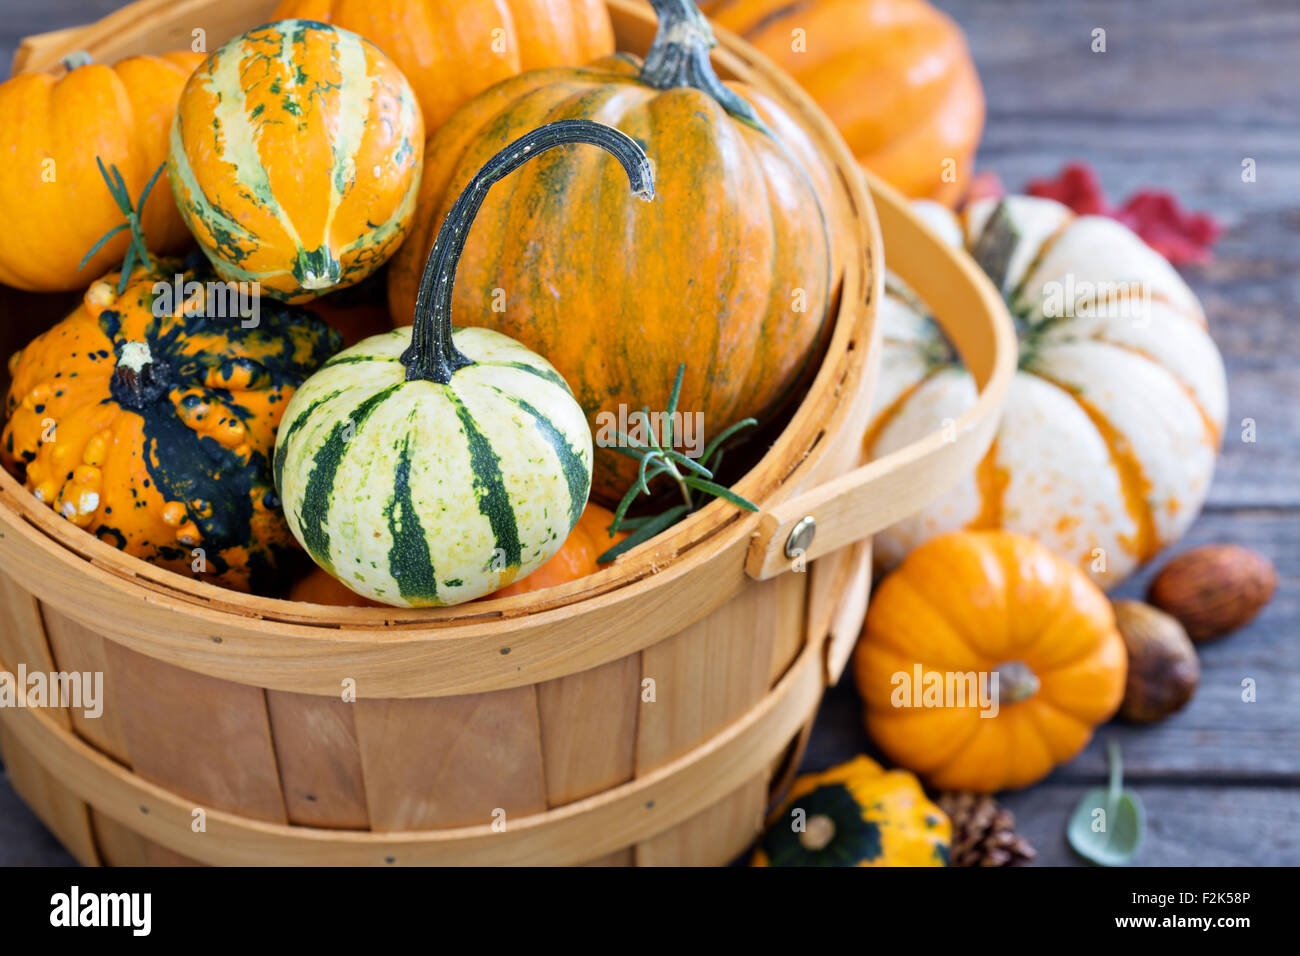 Pumpkins and variety of squash in a harvest basket Stock Photo